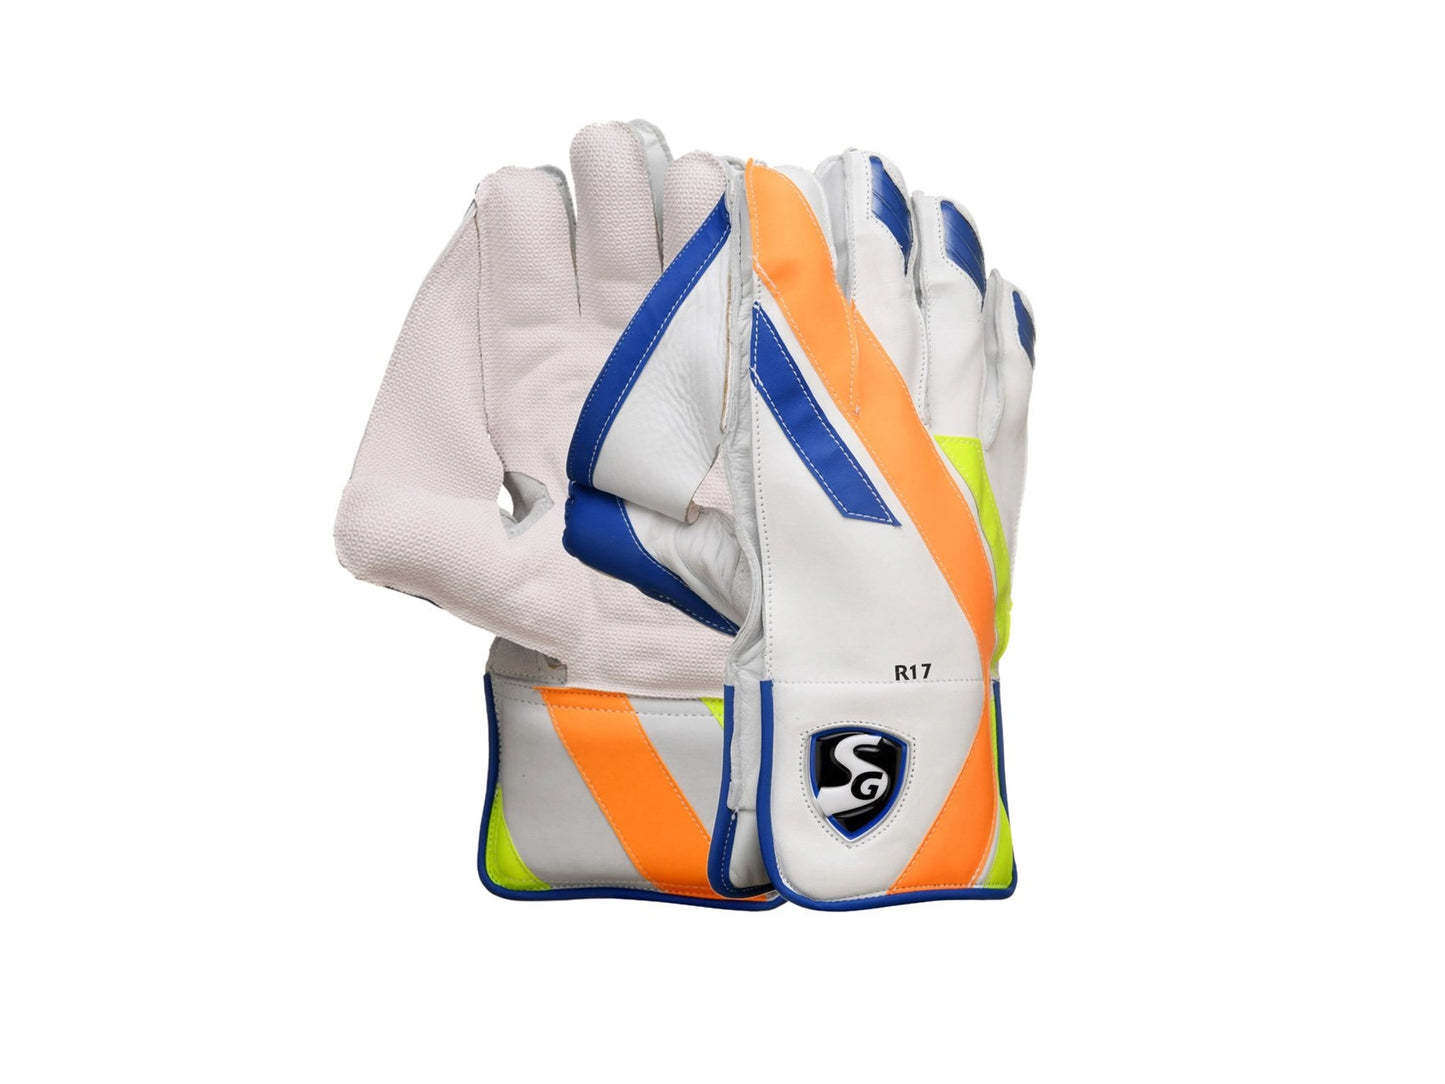 SG RP17 Wicket Keeping Gloves